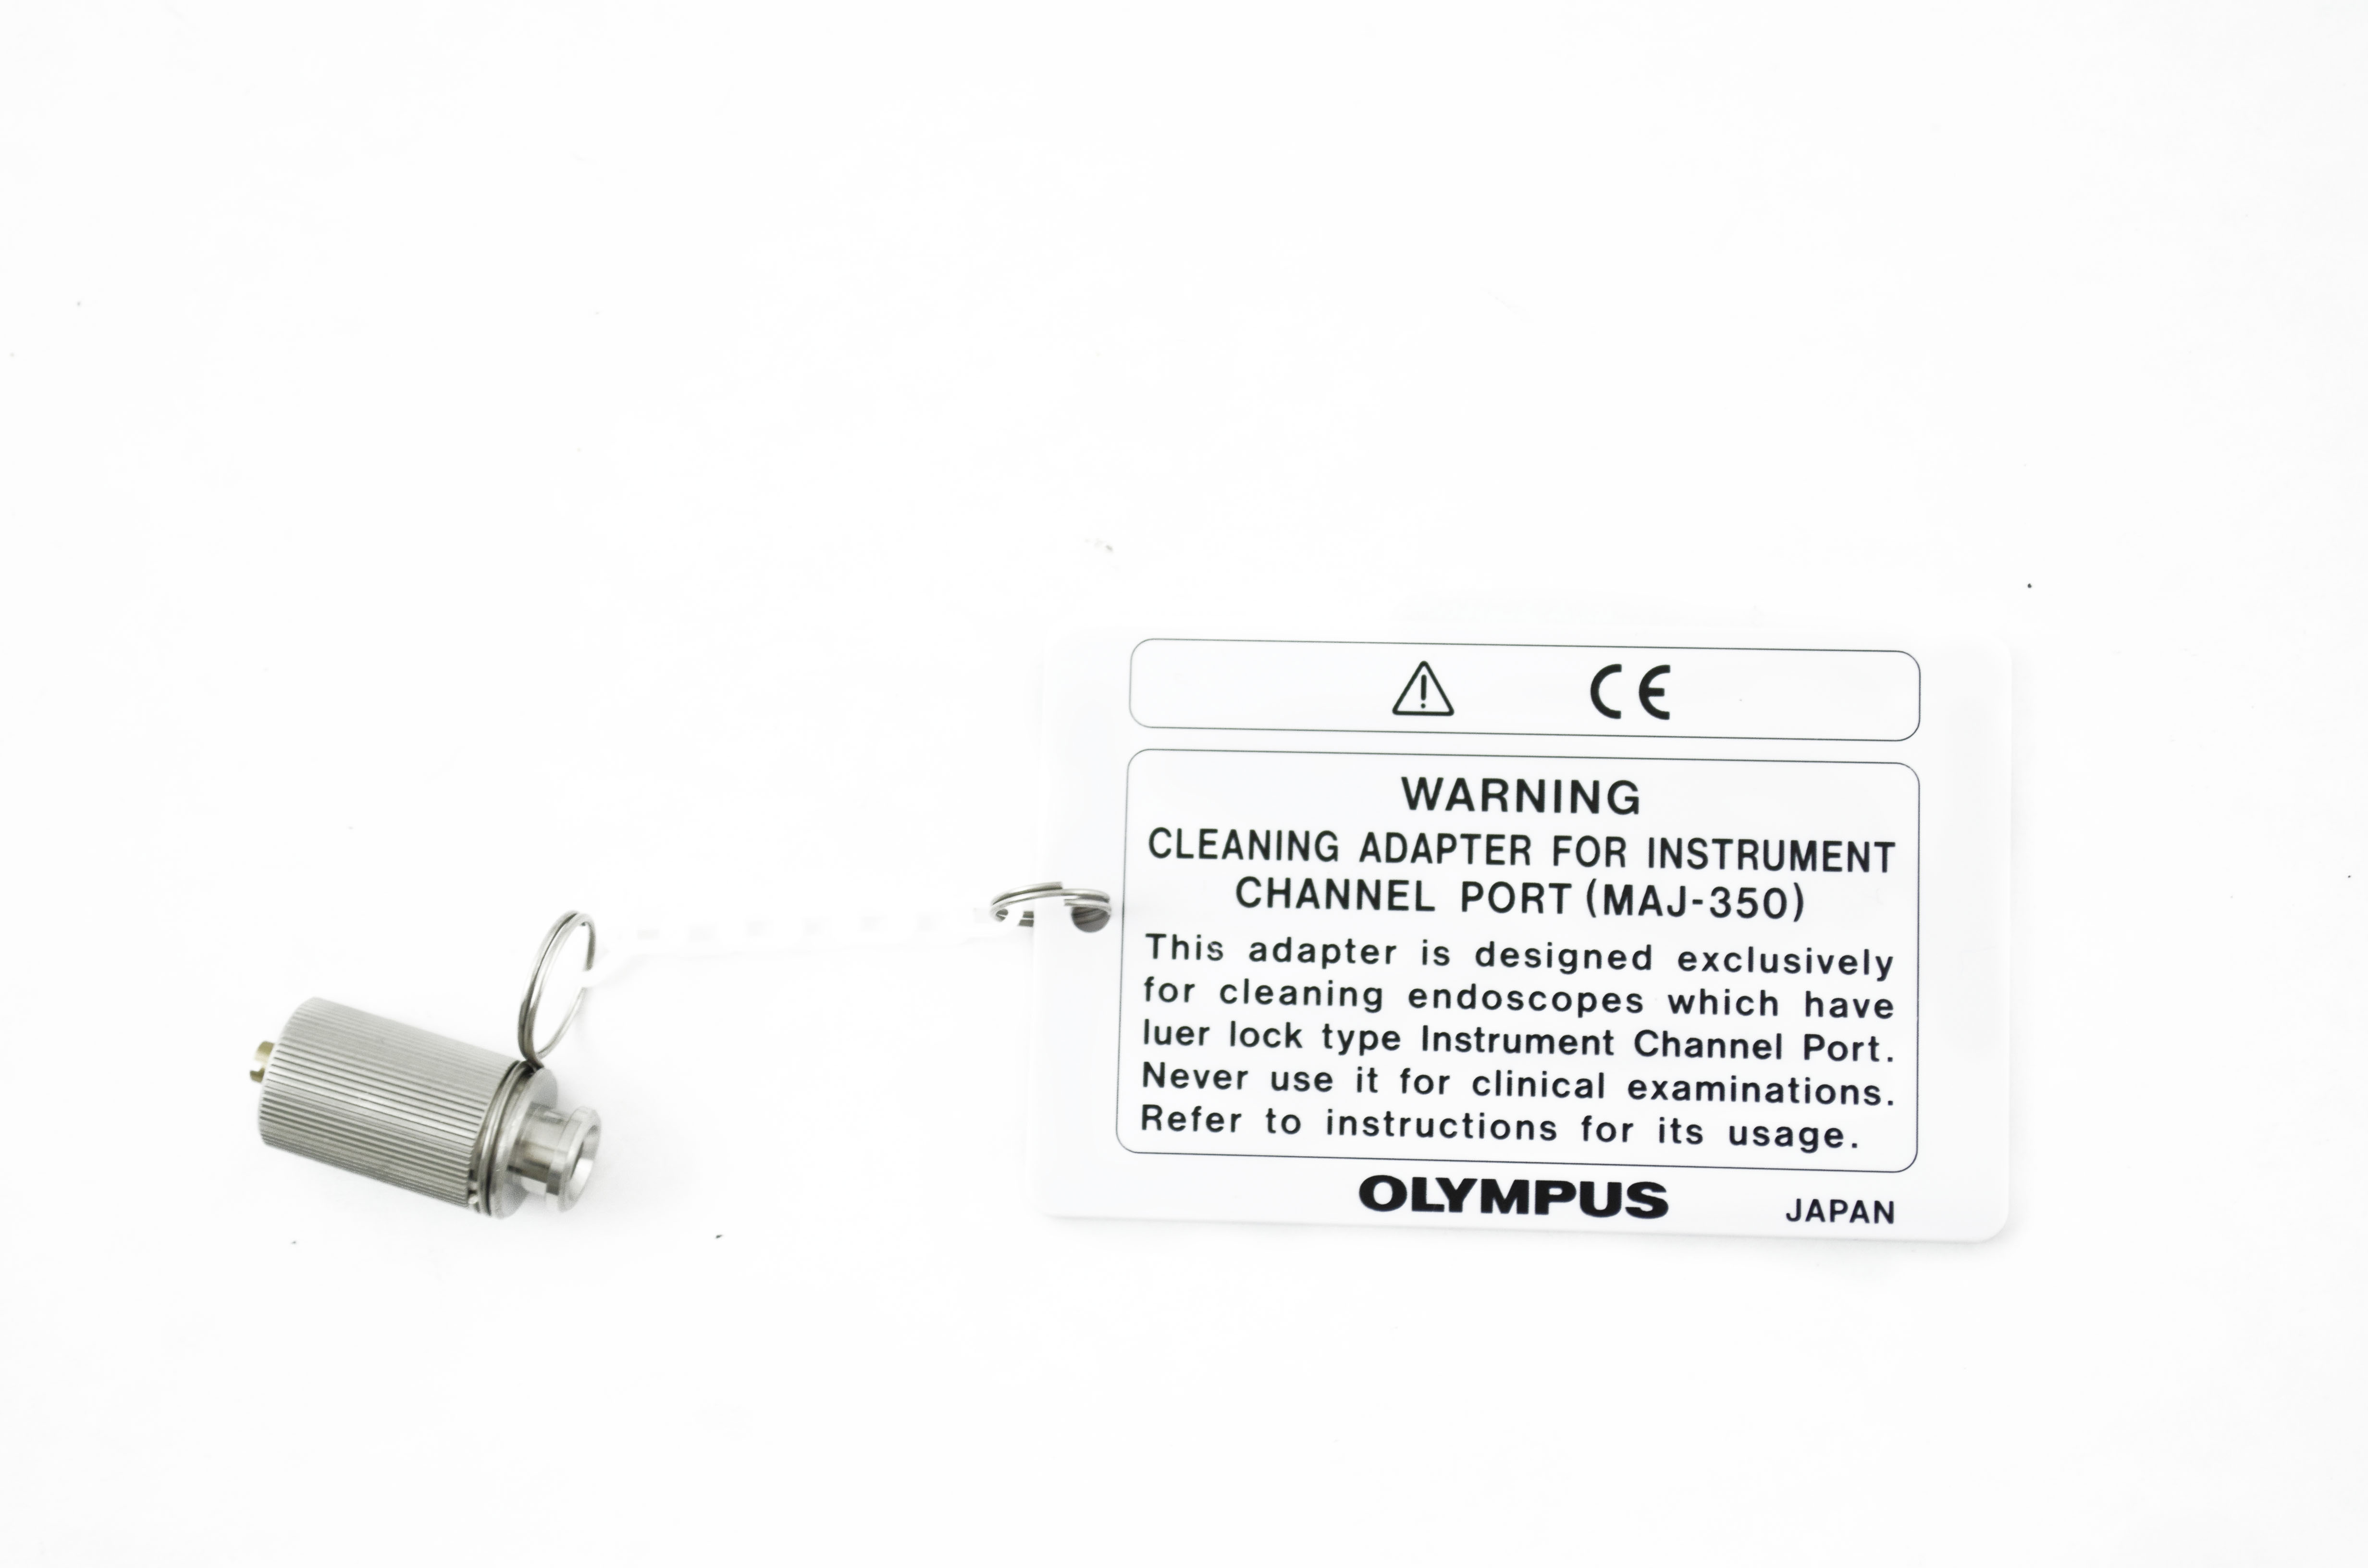 Olympus Reusable Cleaning Adaptor for Instrument Channel Port - MAJ-350